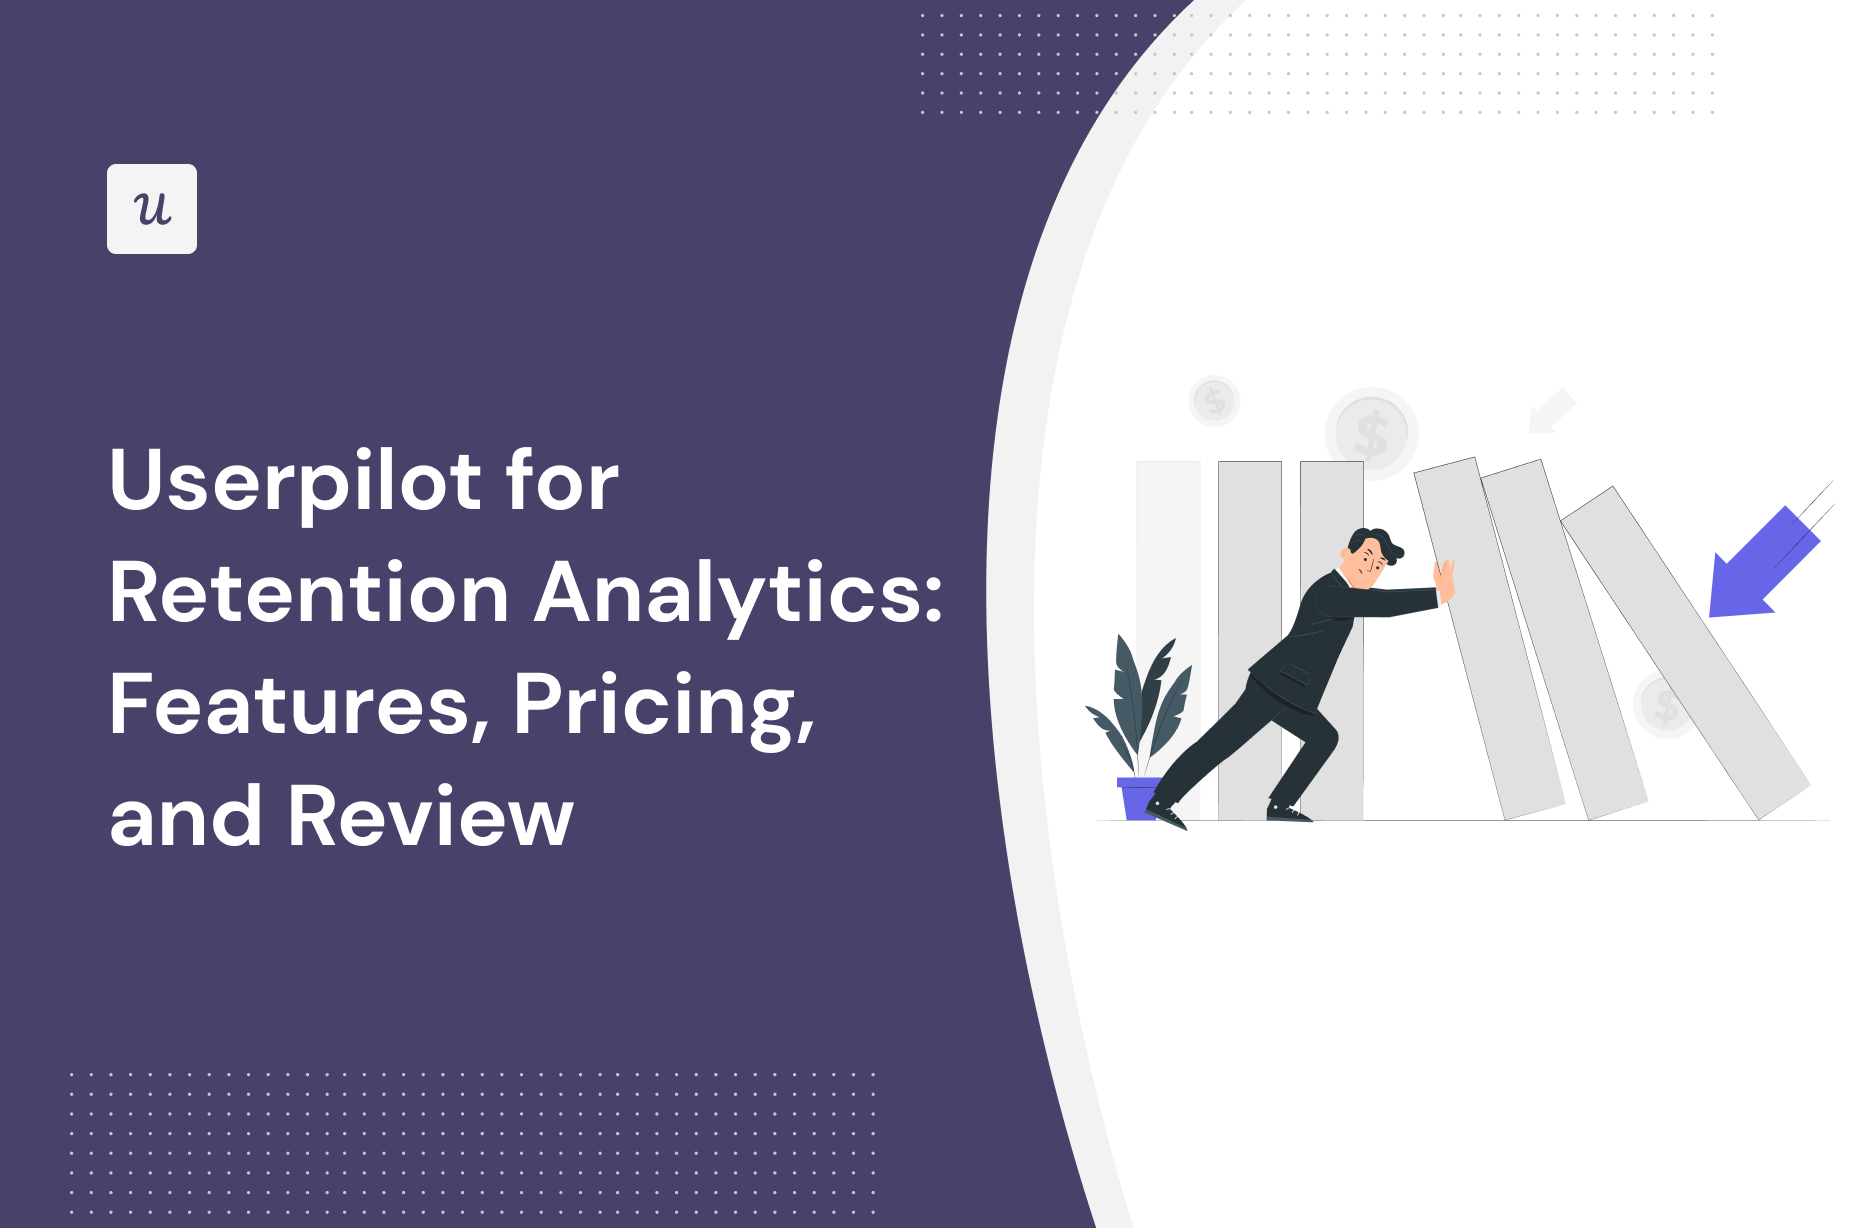 Userpilot for Retention Analytics: Features, Pricing, and Review